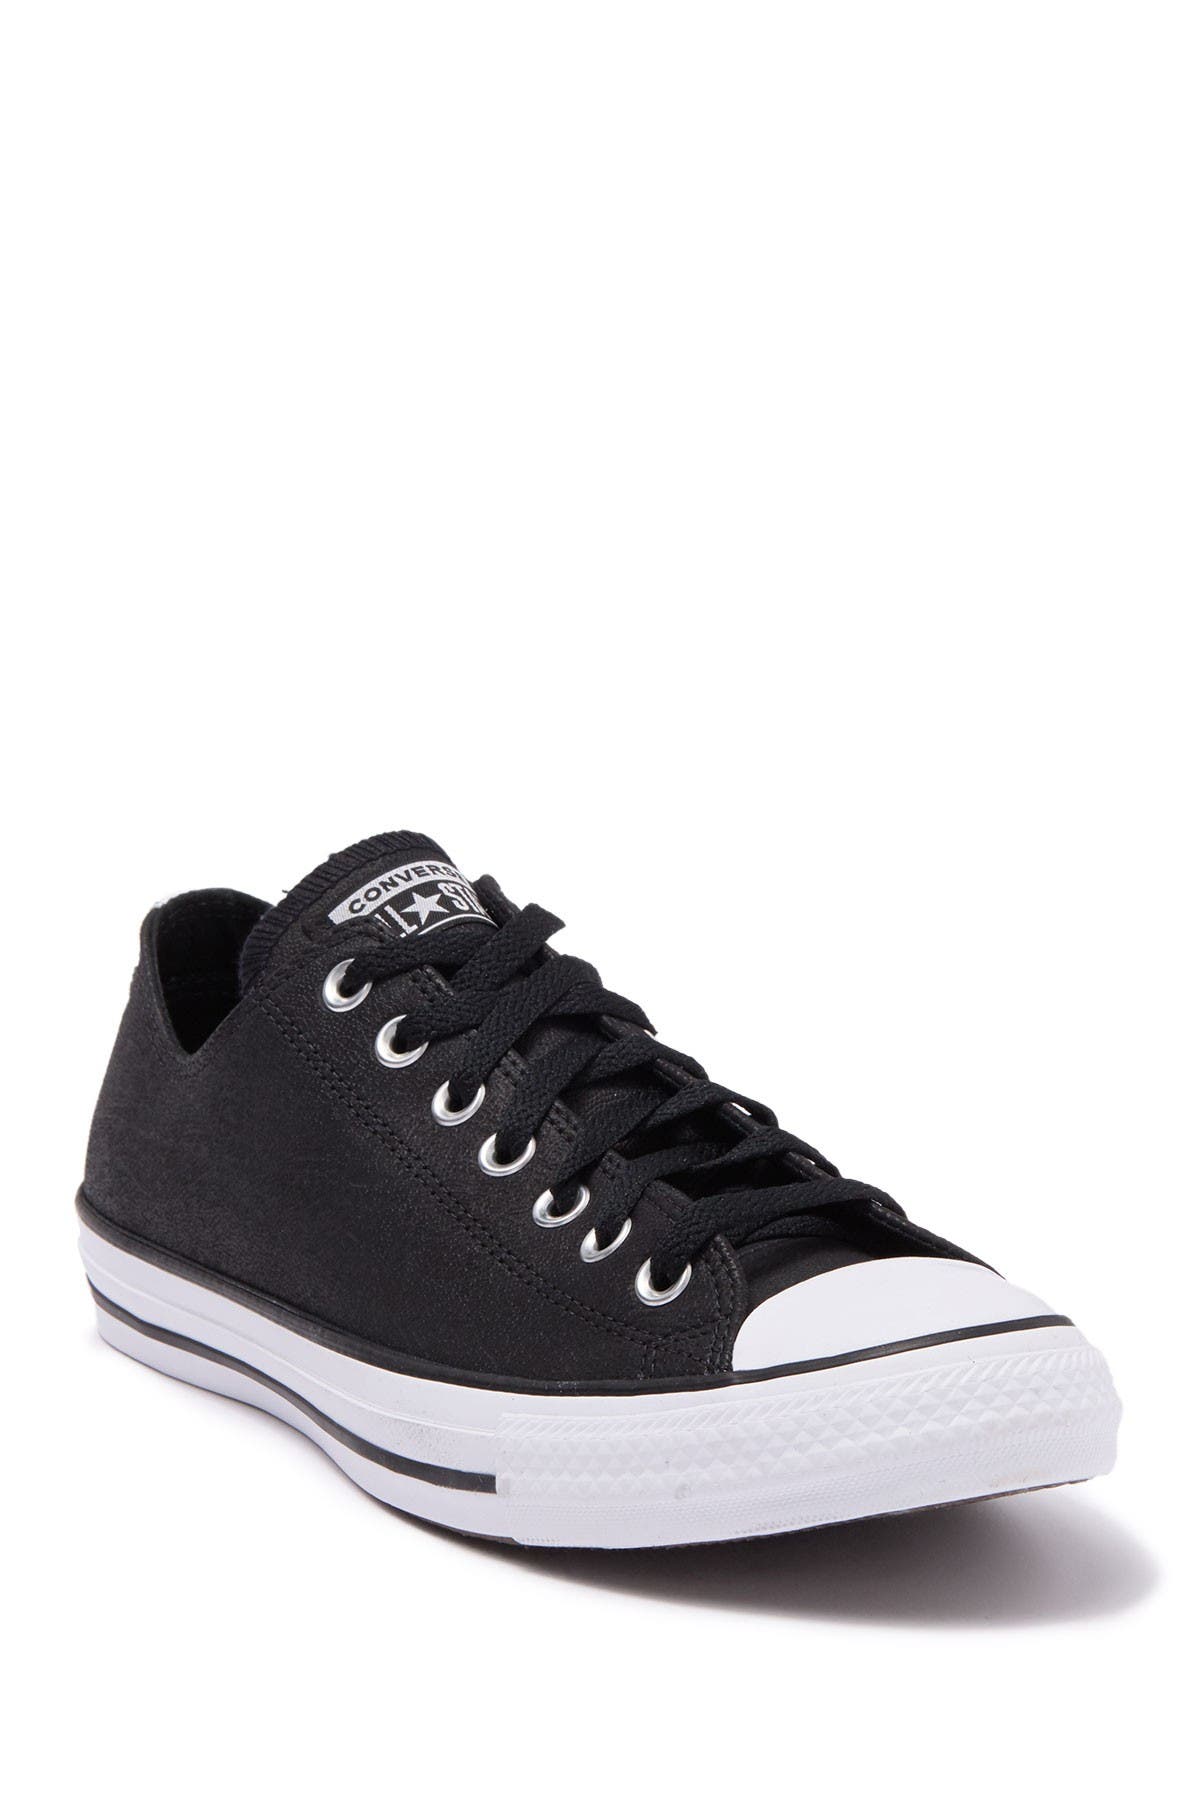 Converse | Chuck Taylor All Star Leather Oxford Sneaker | Nordstrom Rack